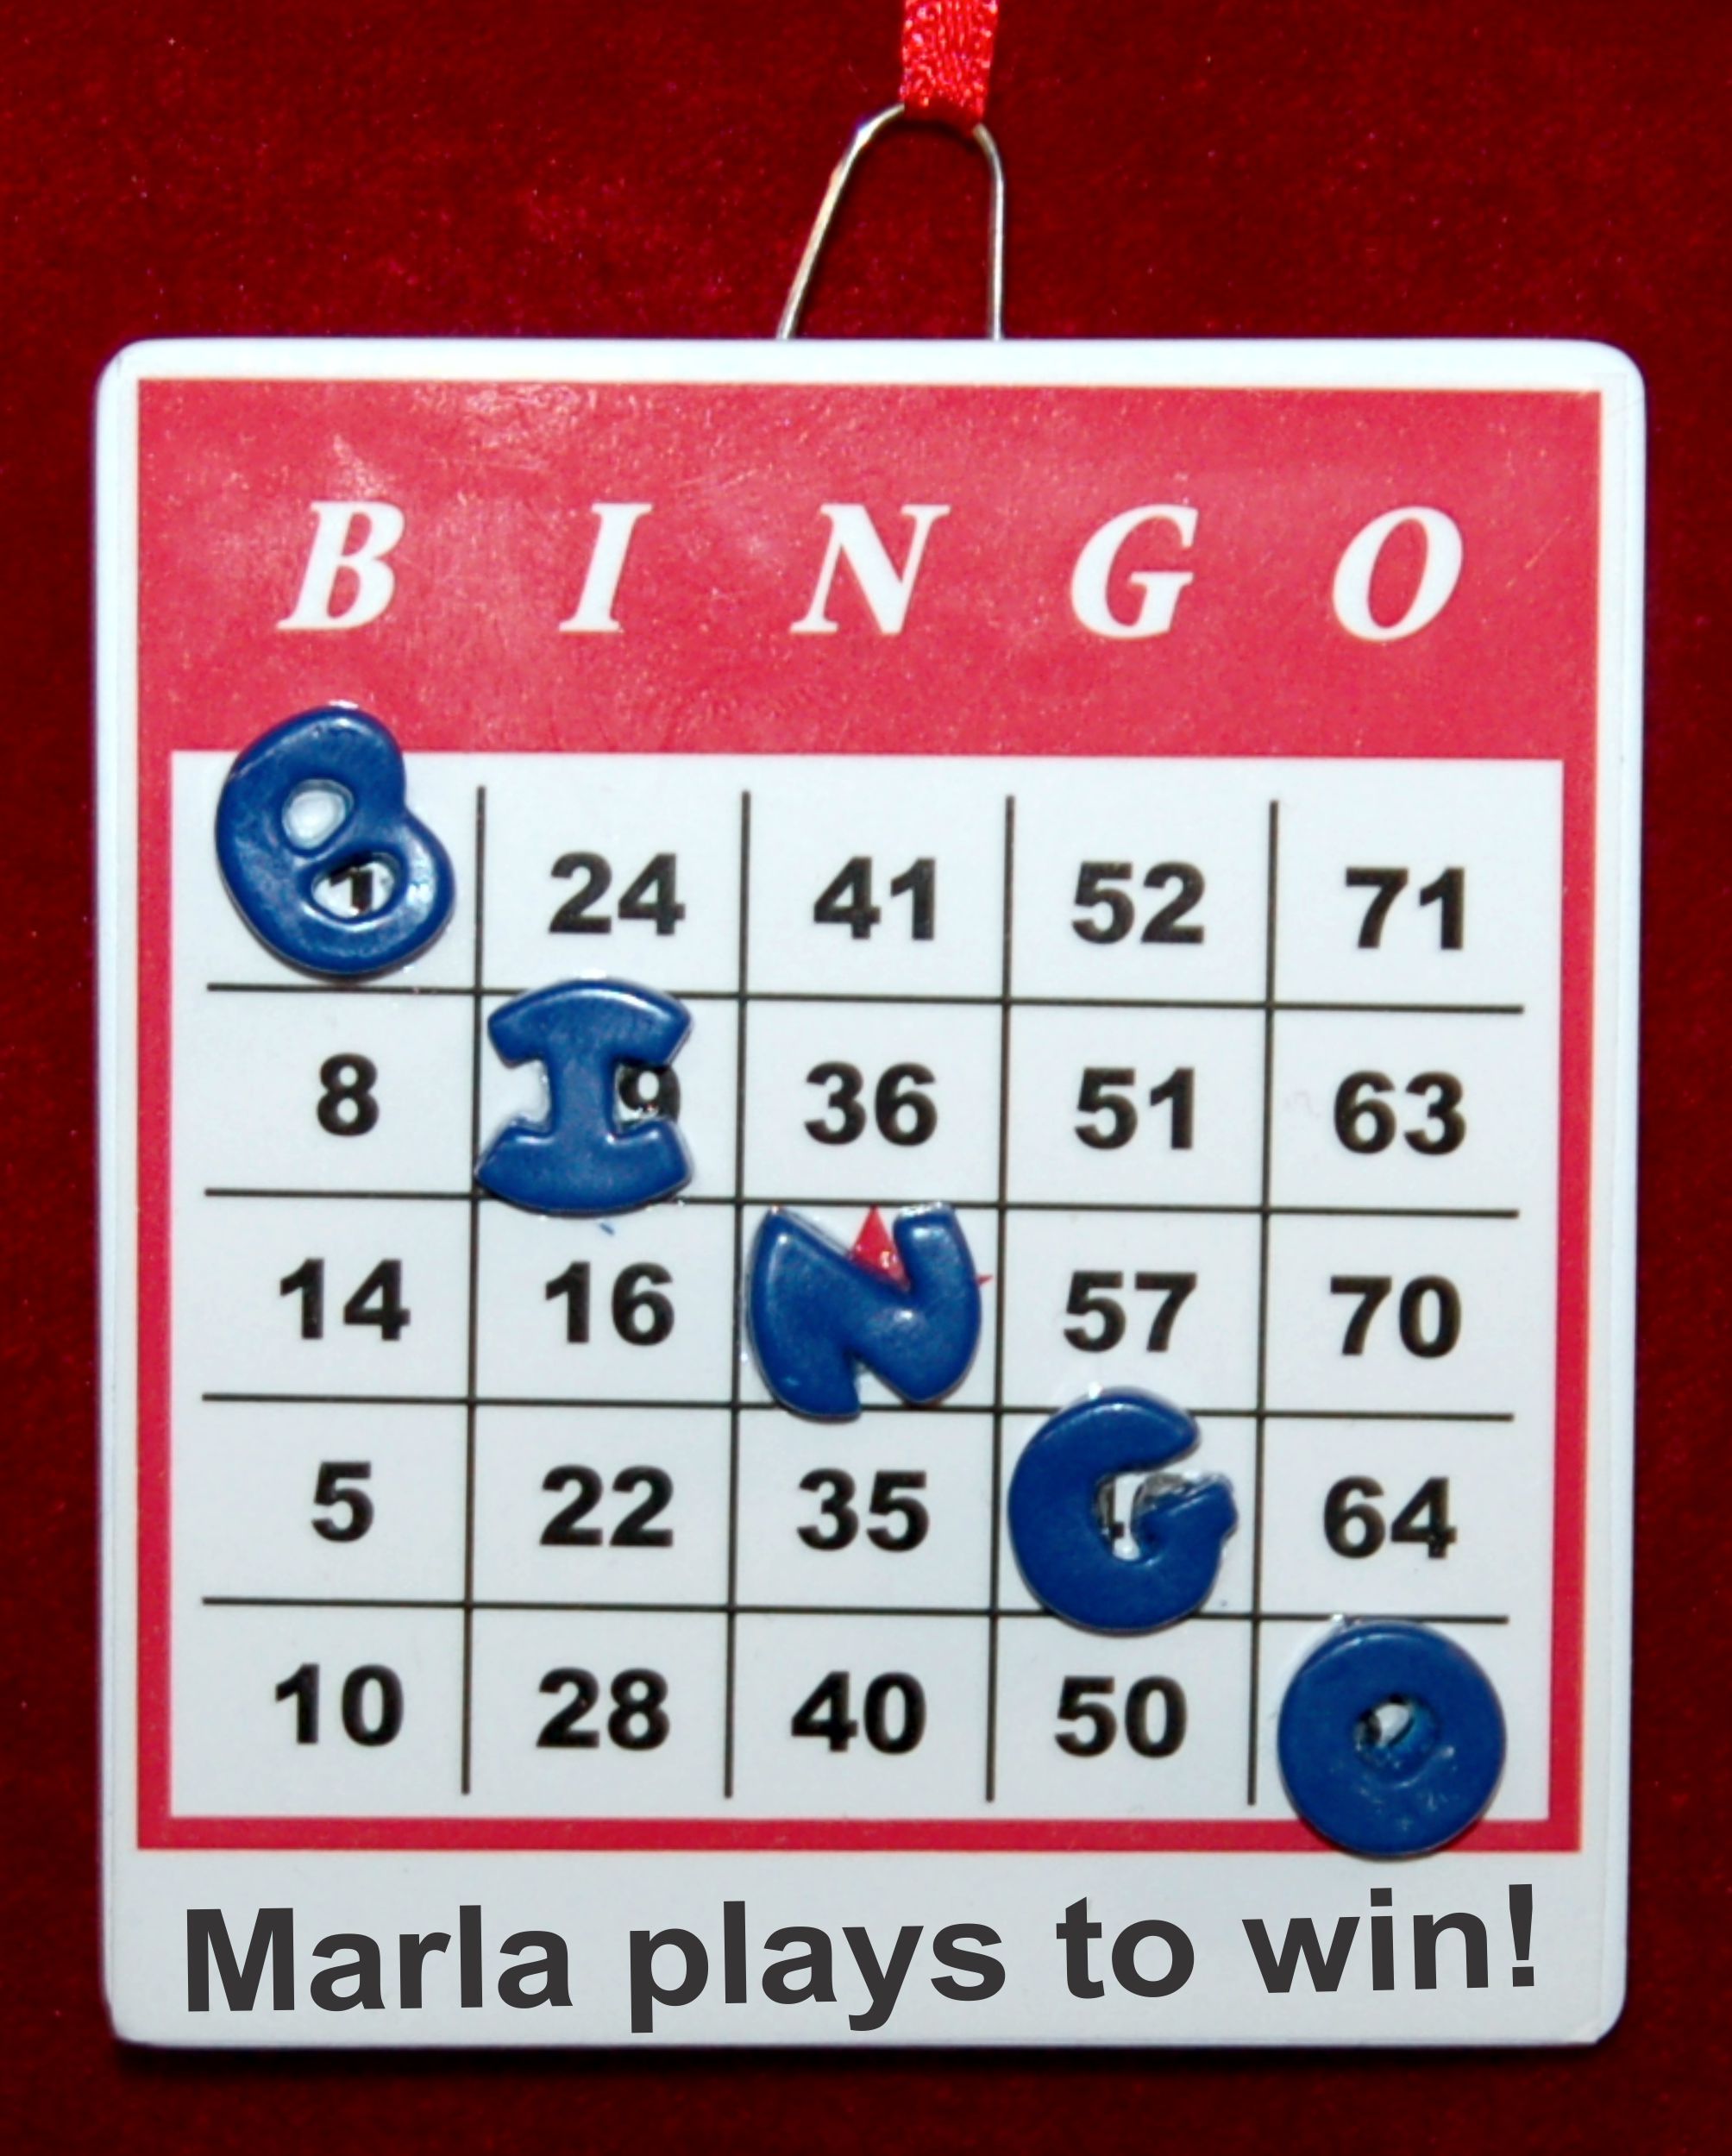 Bingo Christmas Ornament Personalized by RussellRhodes.com